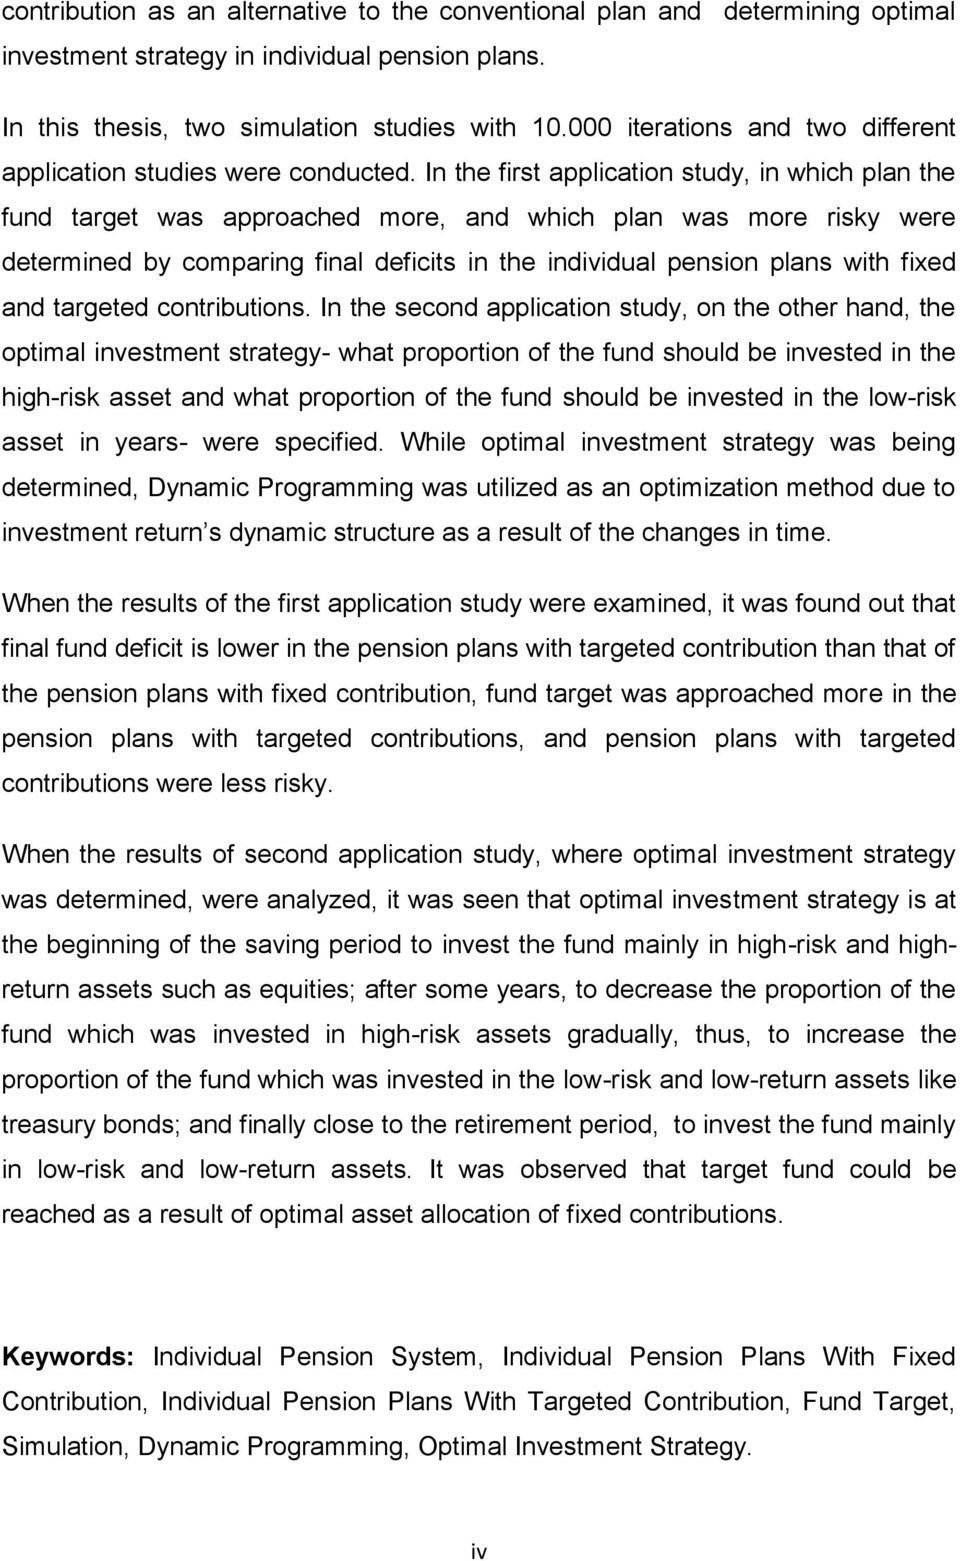 In he firs applicaion sudy, in which plan he fund arge was approached more, and which plan was more risky were deermined by comparing final deficis in he individual pension plans wih fixed and argeed